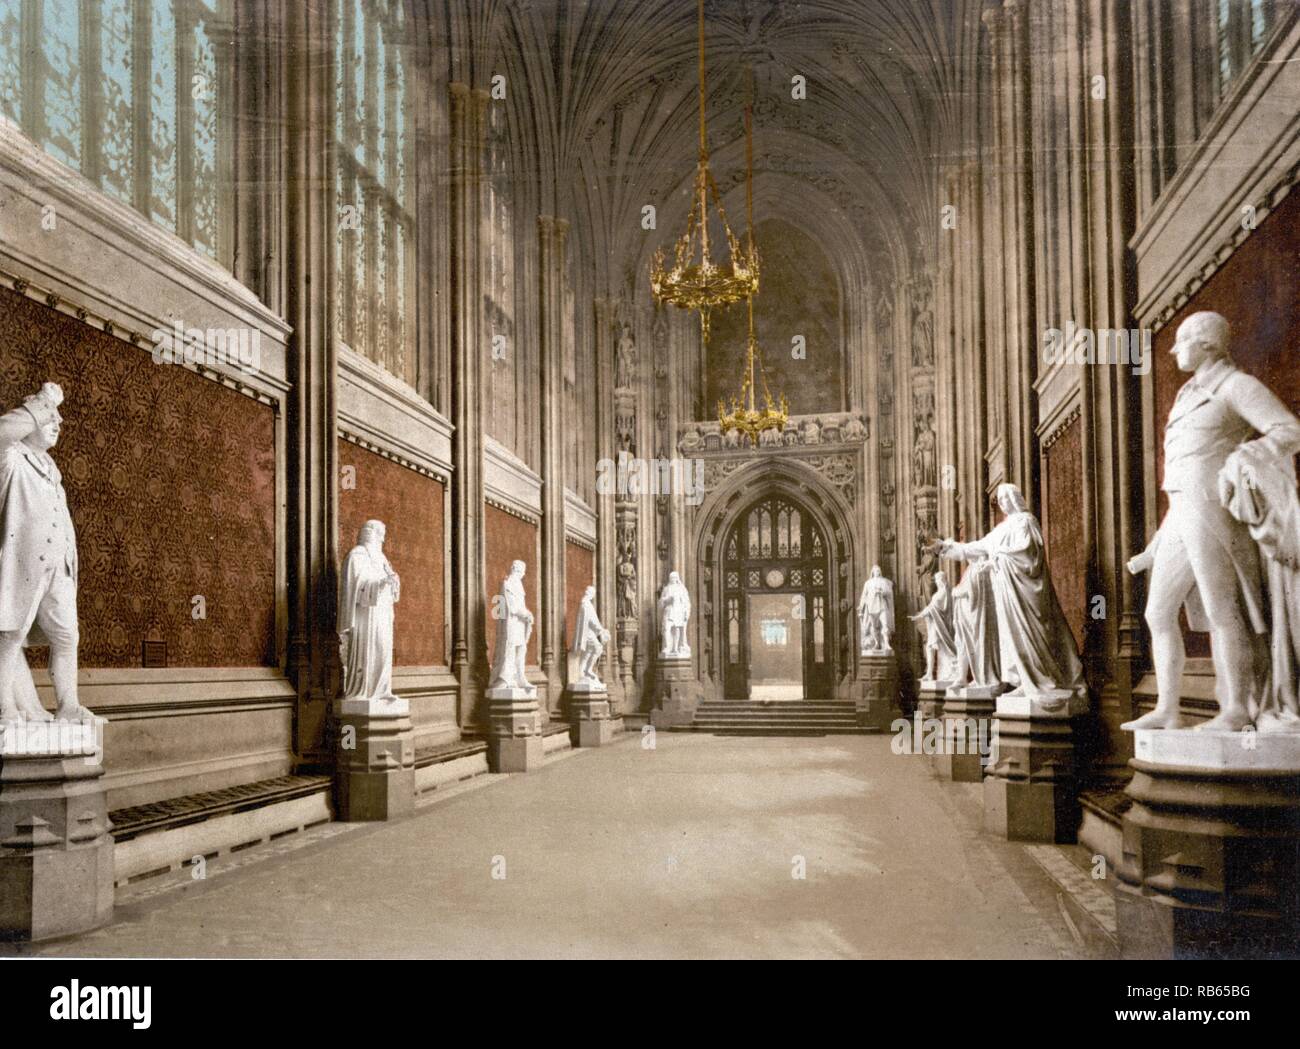 Image shows interior shot of the Houses of Parliament . St. Stephens's hall, London England. C1890. Stock Photo